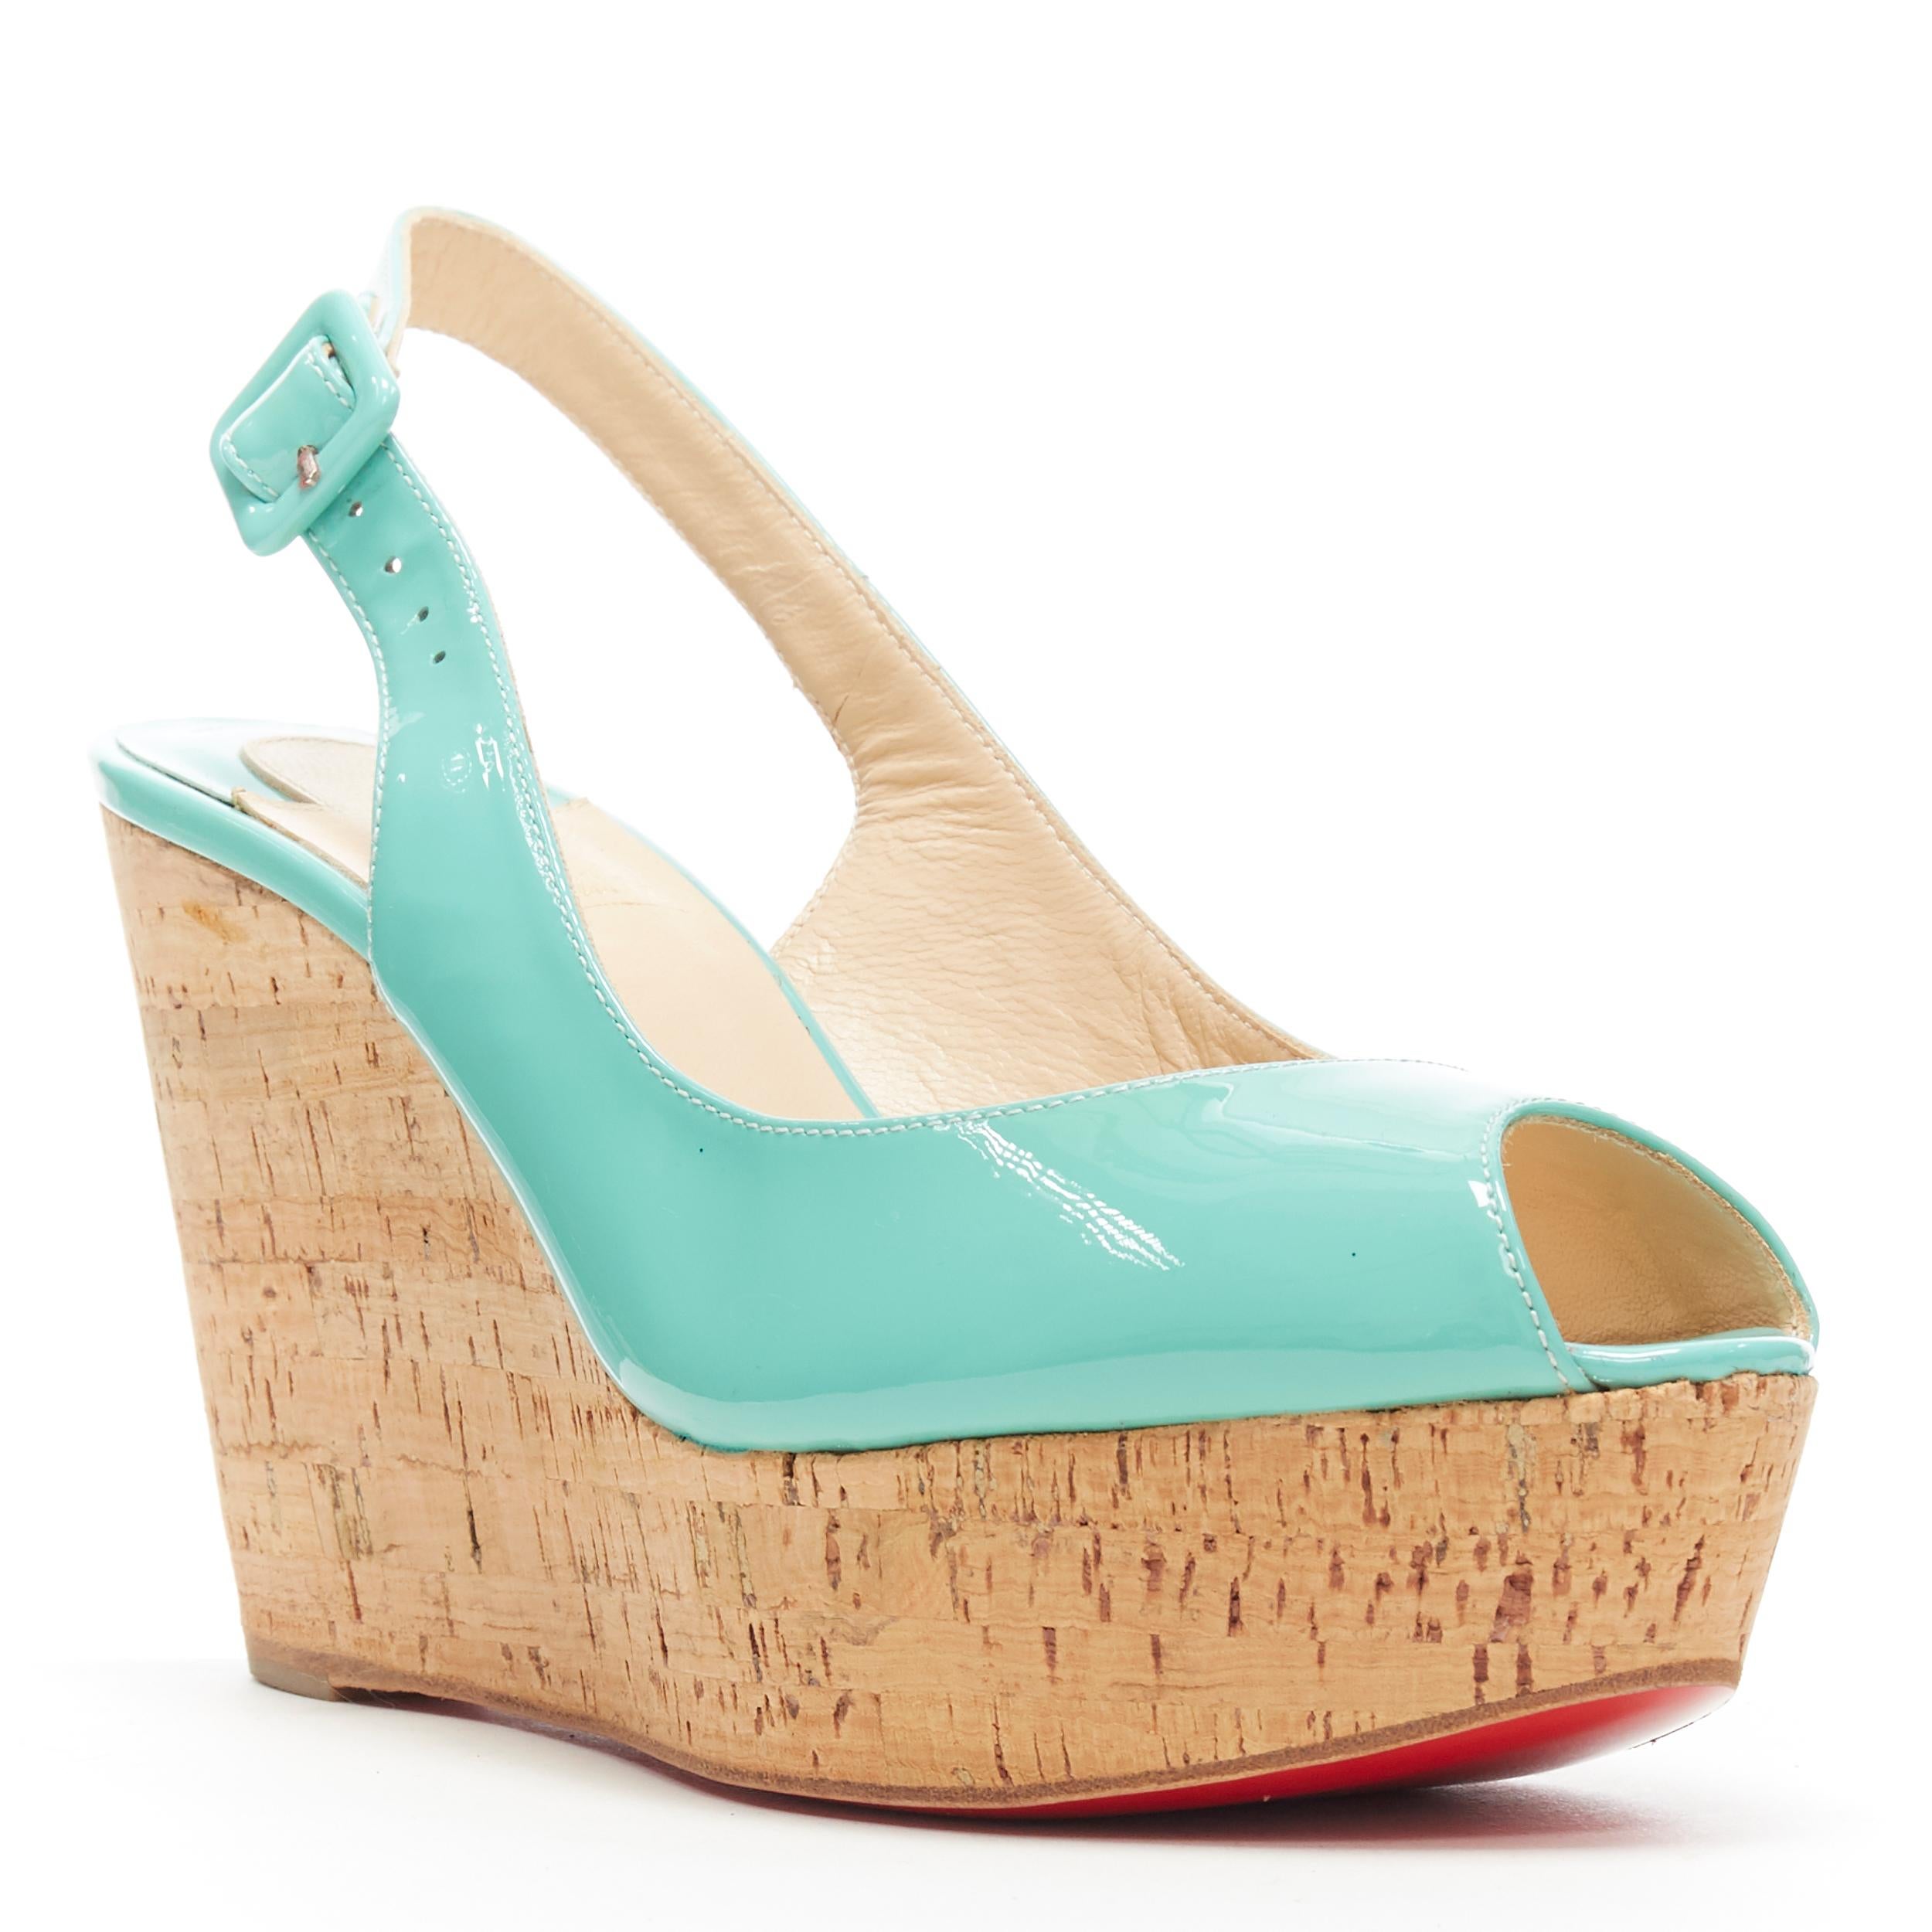 CHRISTIAN LOUBOUTIN teal green patent peep toe sling back cork wedge heel EU37
Brand: Christian Louboutin
Designer: Christian Louboutin
Model Name / Style: Wedge
Material: Patent leather
Color: Turquoise
Pattern: Solid
Closure: Buckle
Extra Detail: